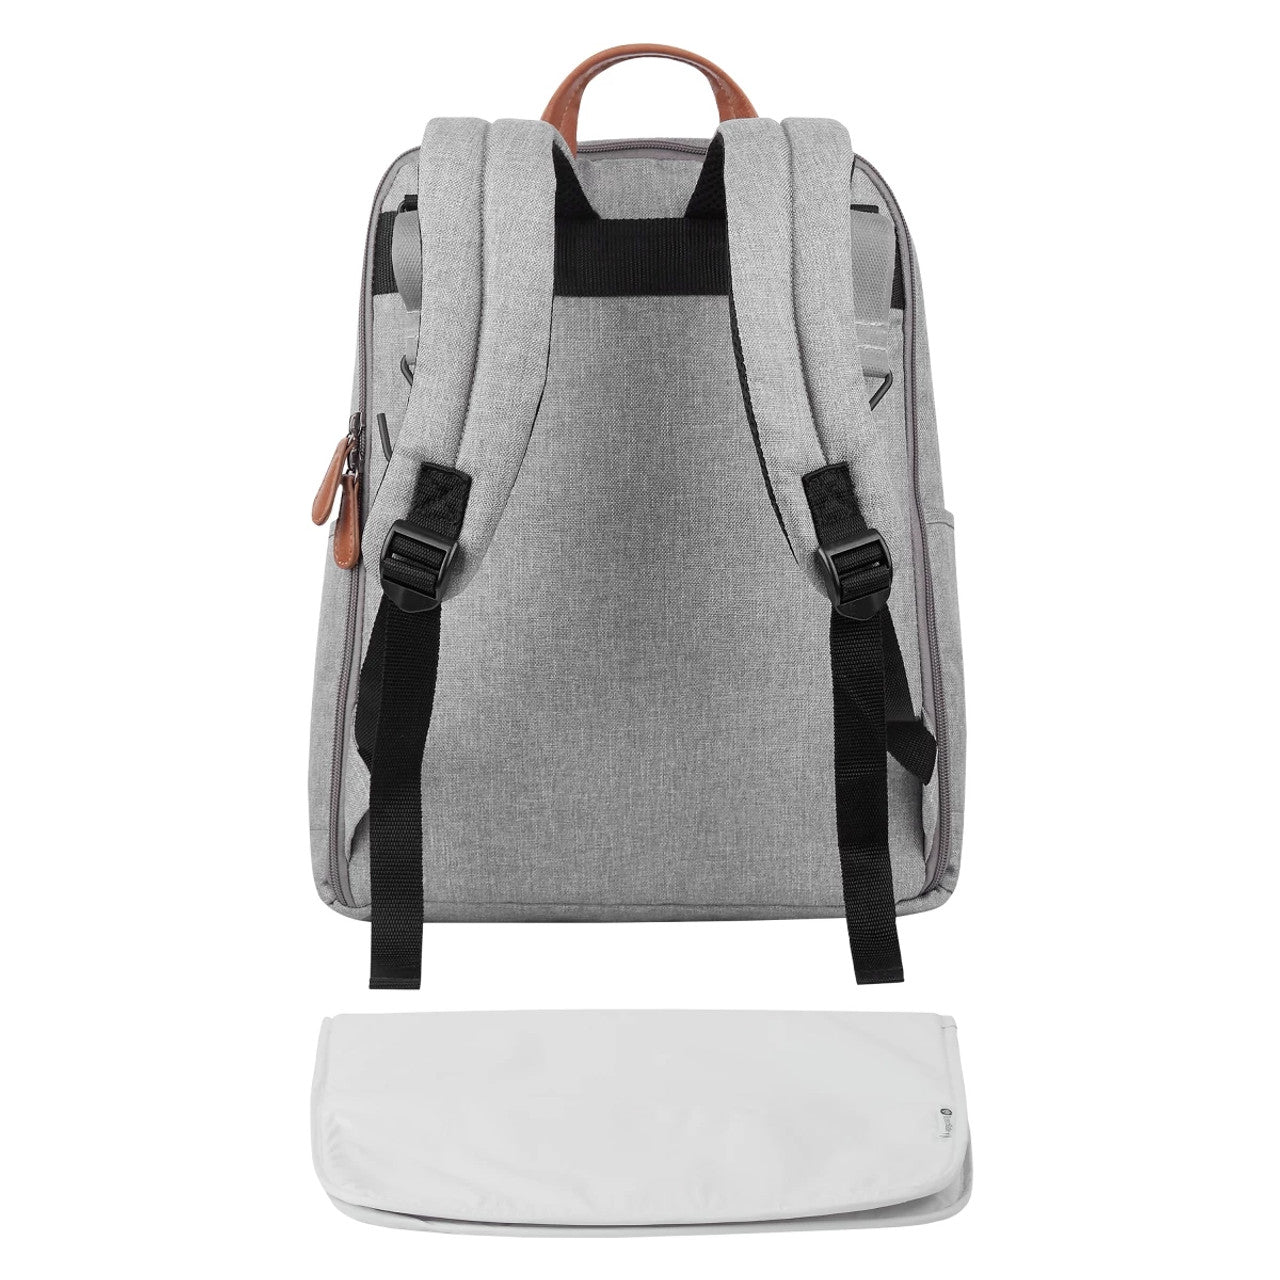 Totes Babe Montana Diaper Backpack - Grey